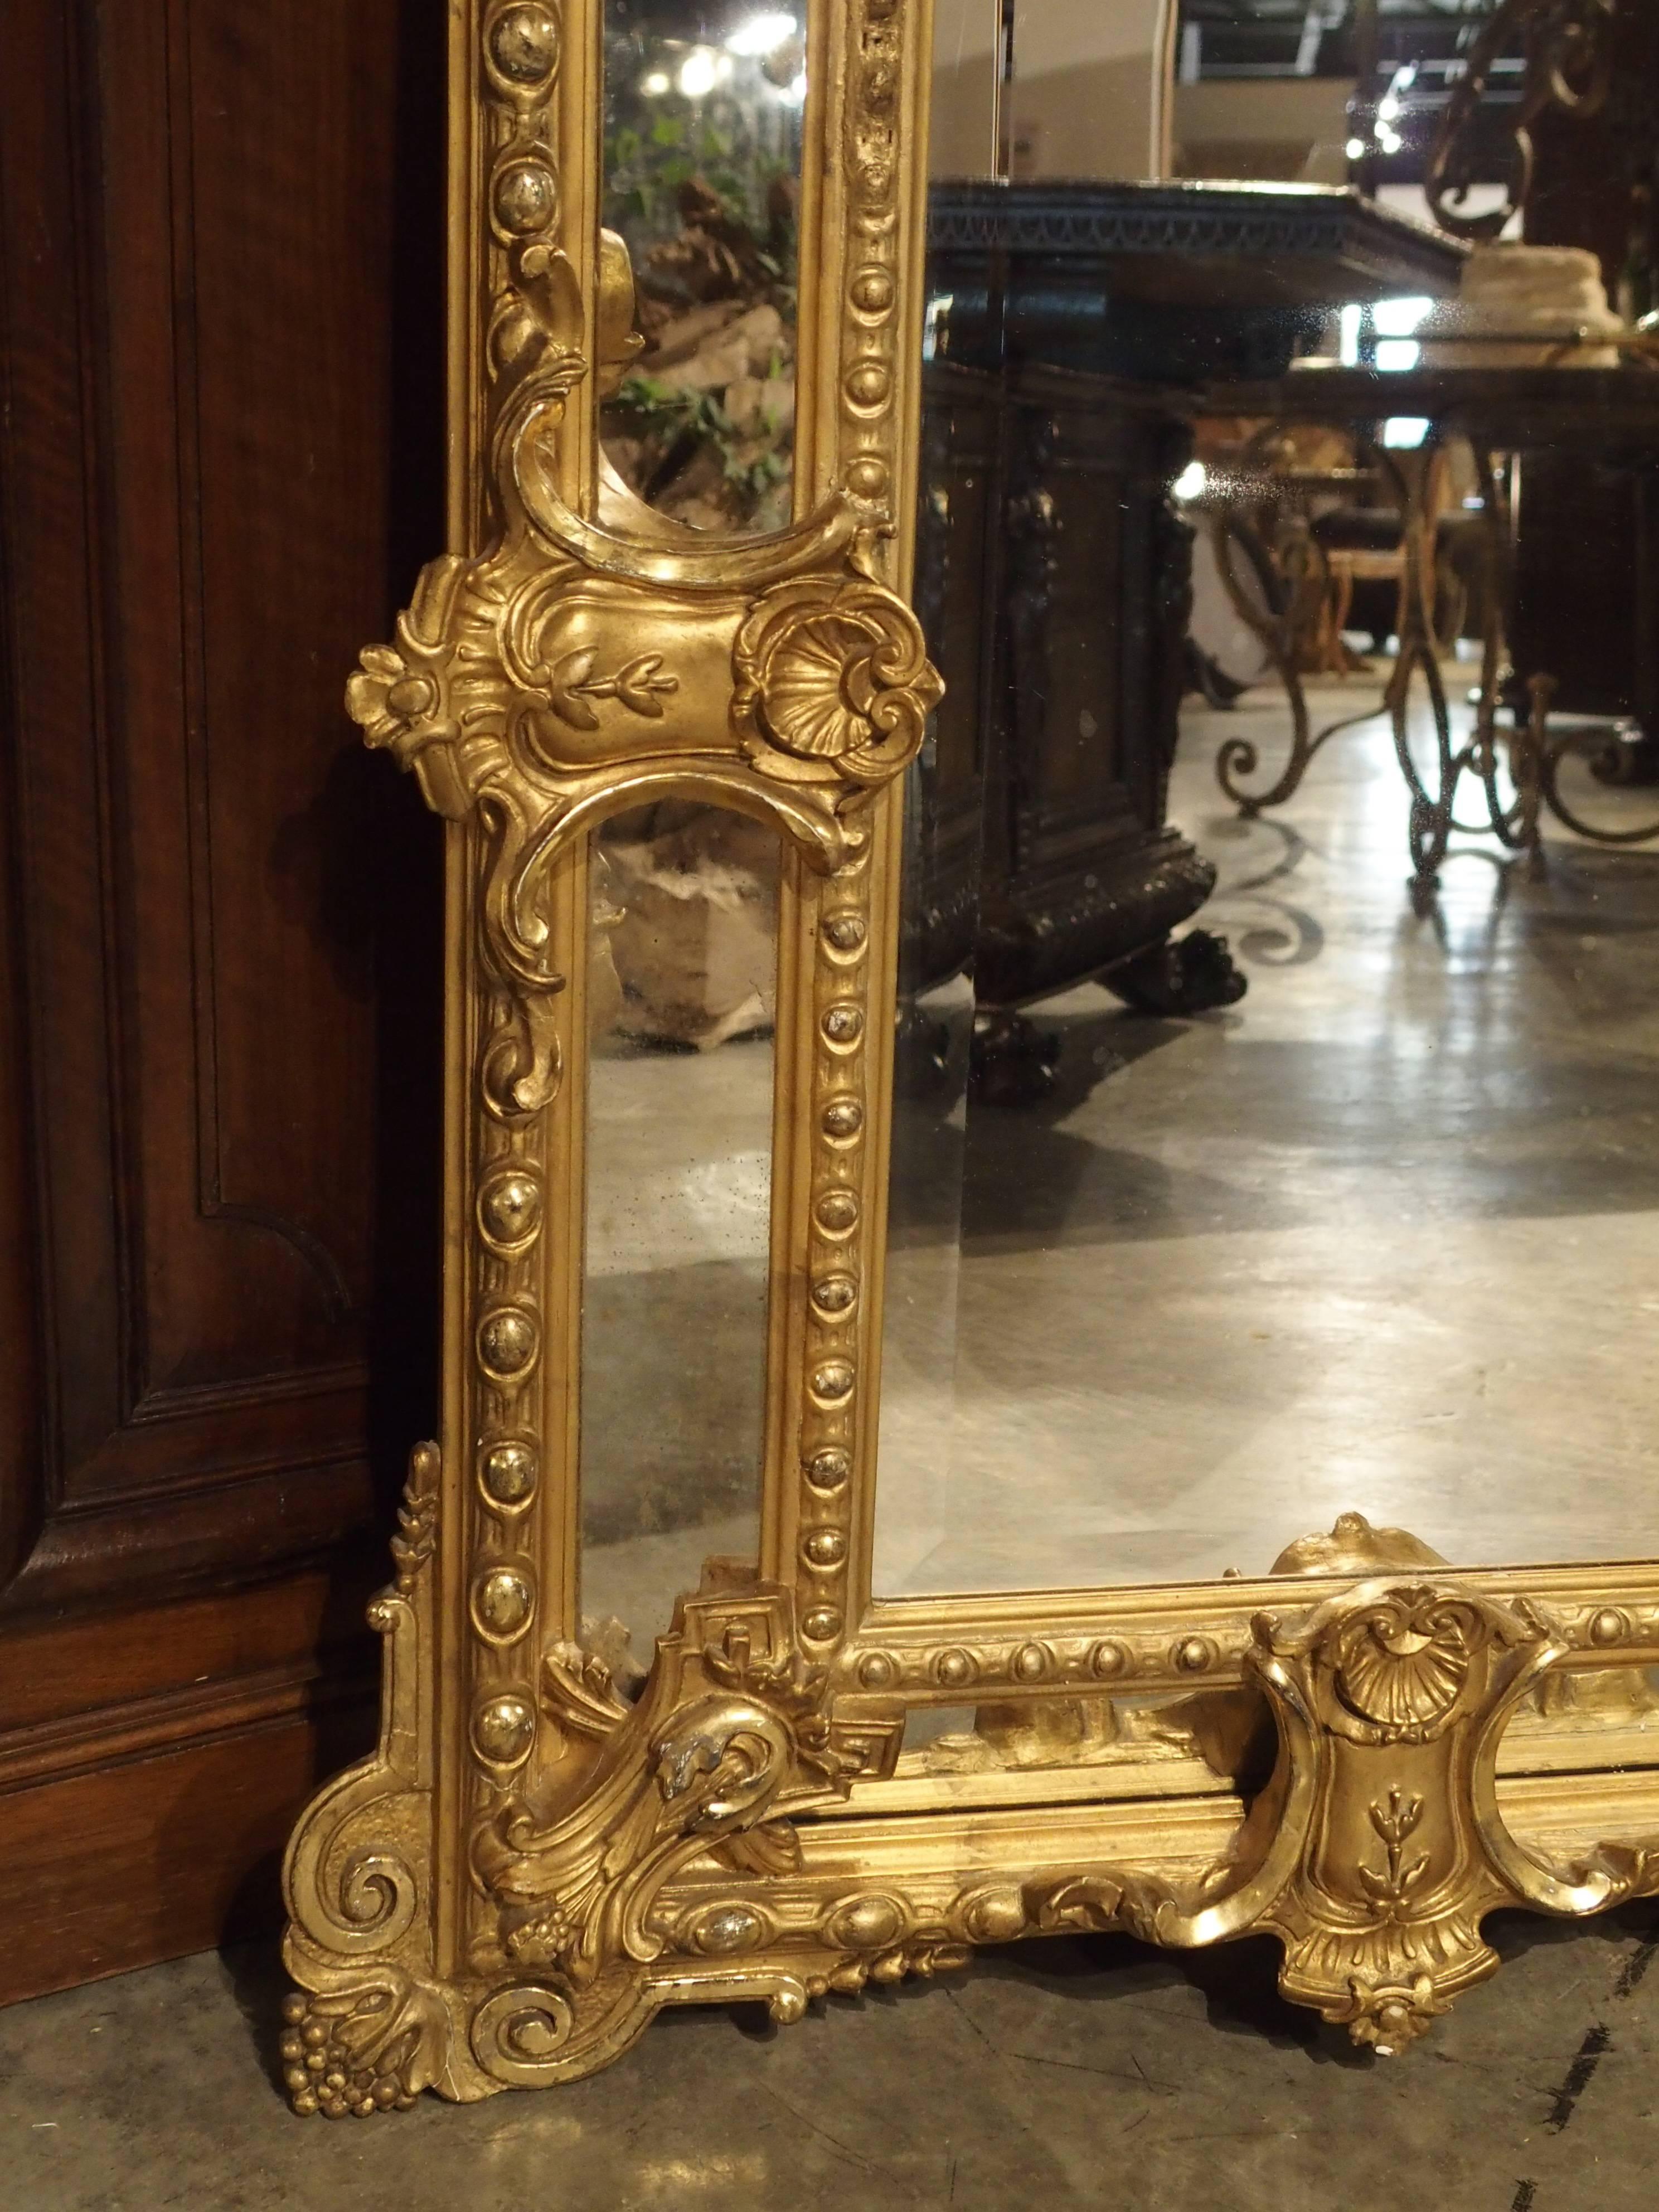 This elegant, antique French, gilded, Louis XV style mirror is called a Mirror a “Parcloses” in France. It has four canted side mirrored panels separated and held in place from the main center mirror by giltwood ornamentation. The unusual